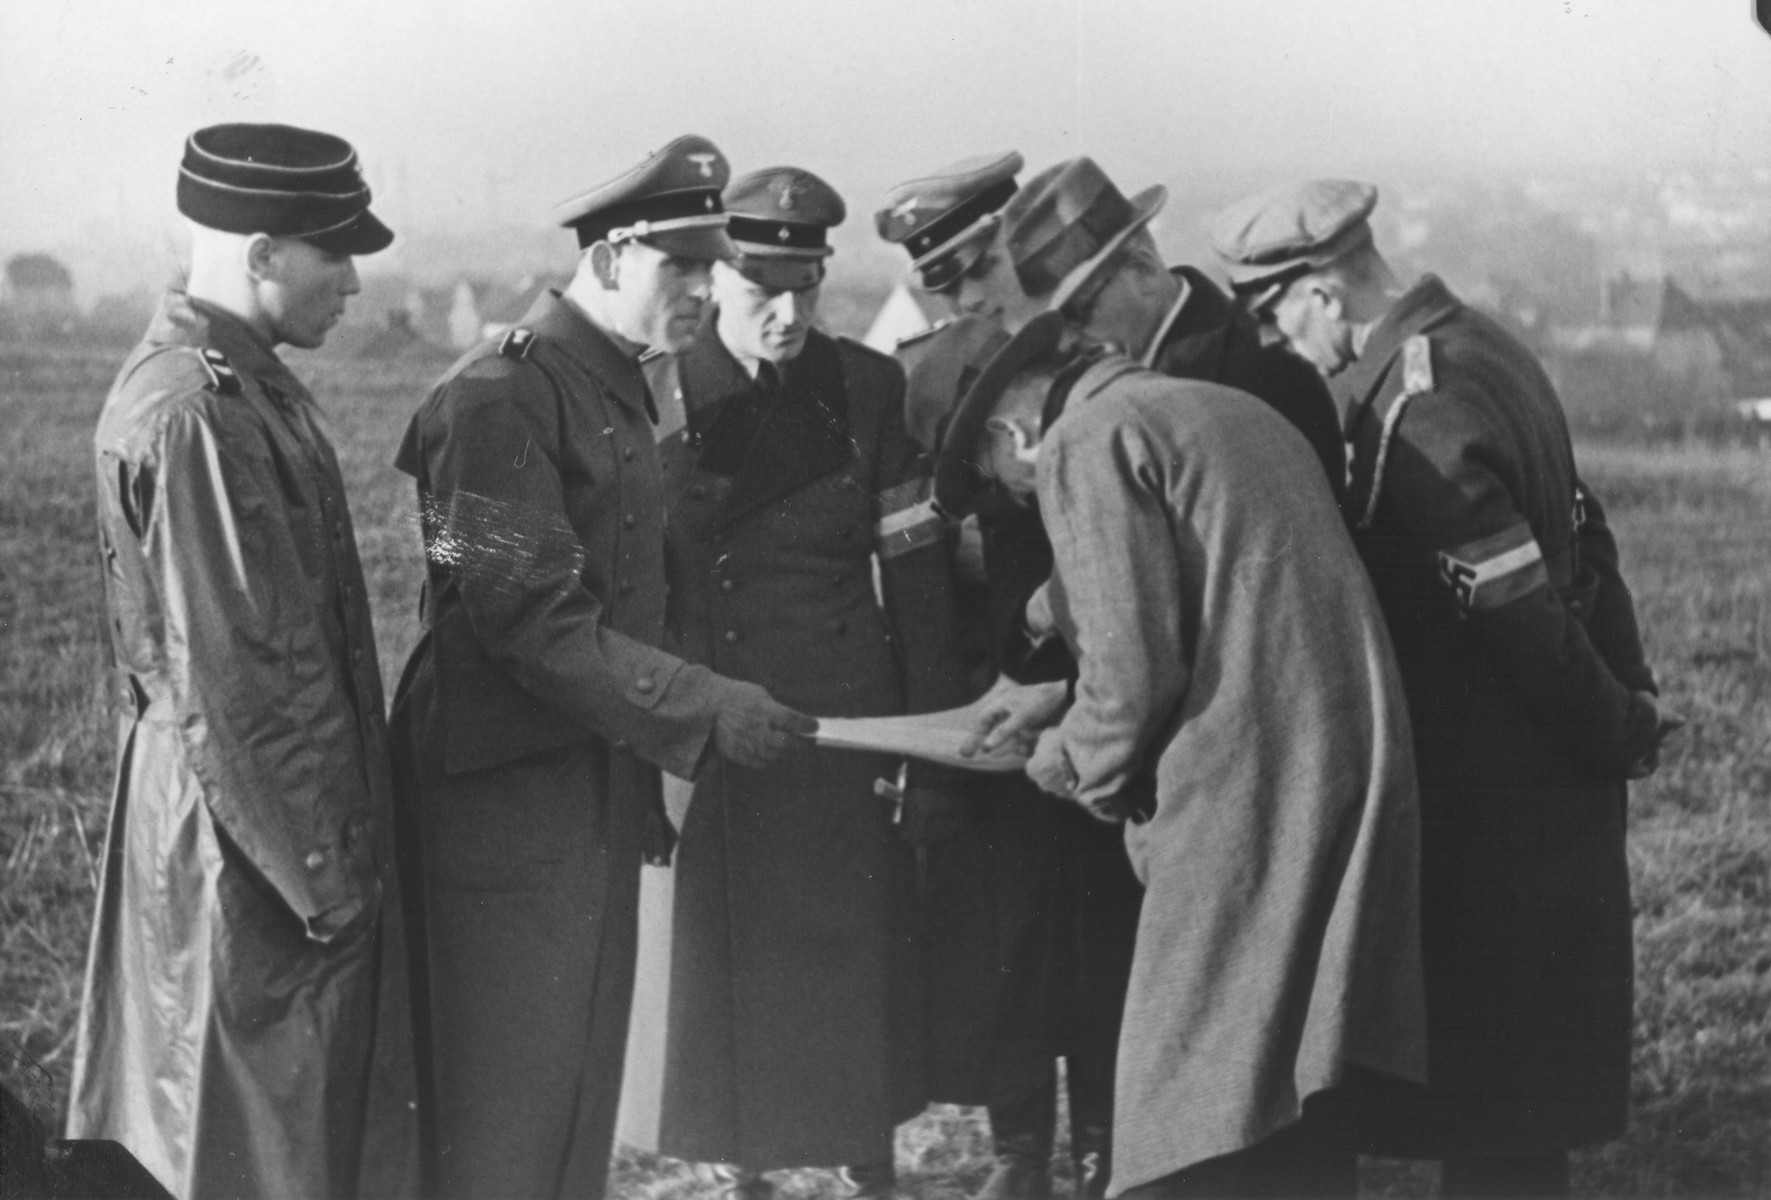 A group of uniformed Germans look on as two civilians study a map in an open field.